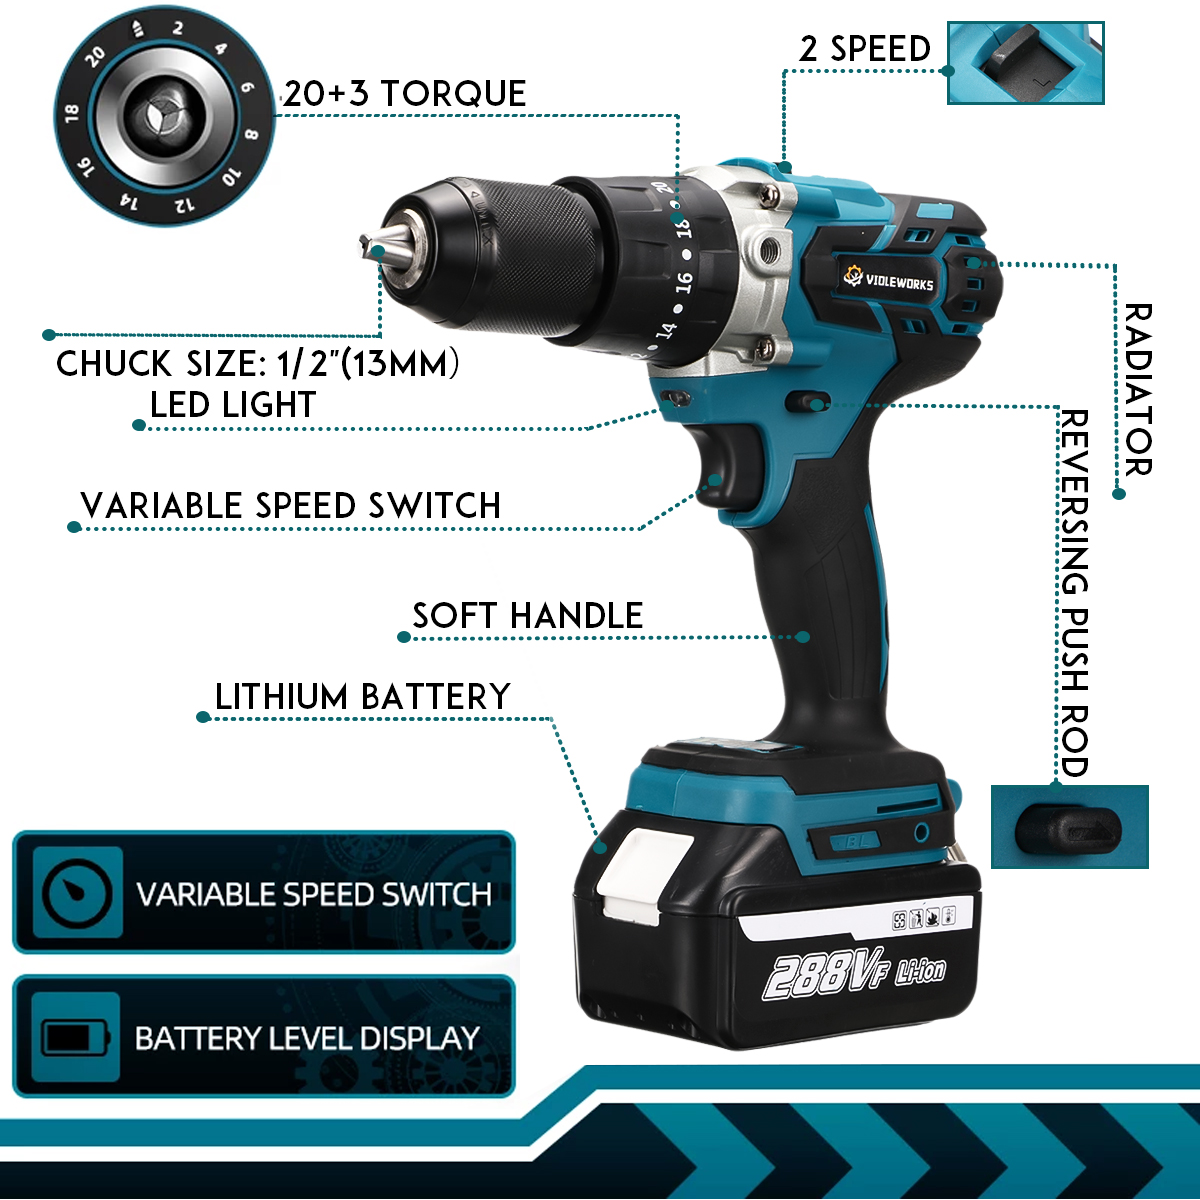 VIOLEWORKS-3-IN-1-288VF-Cordless-Brushless-Hammer-Drill-Speed-Regulated-Electric-Screwdriver-Impact--1852902-4